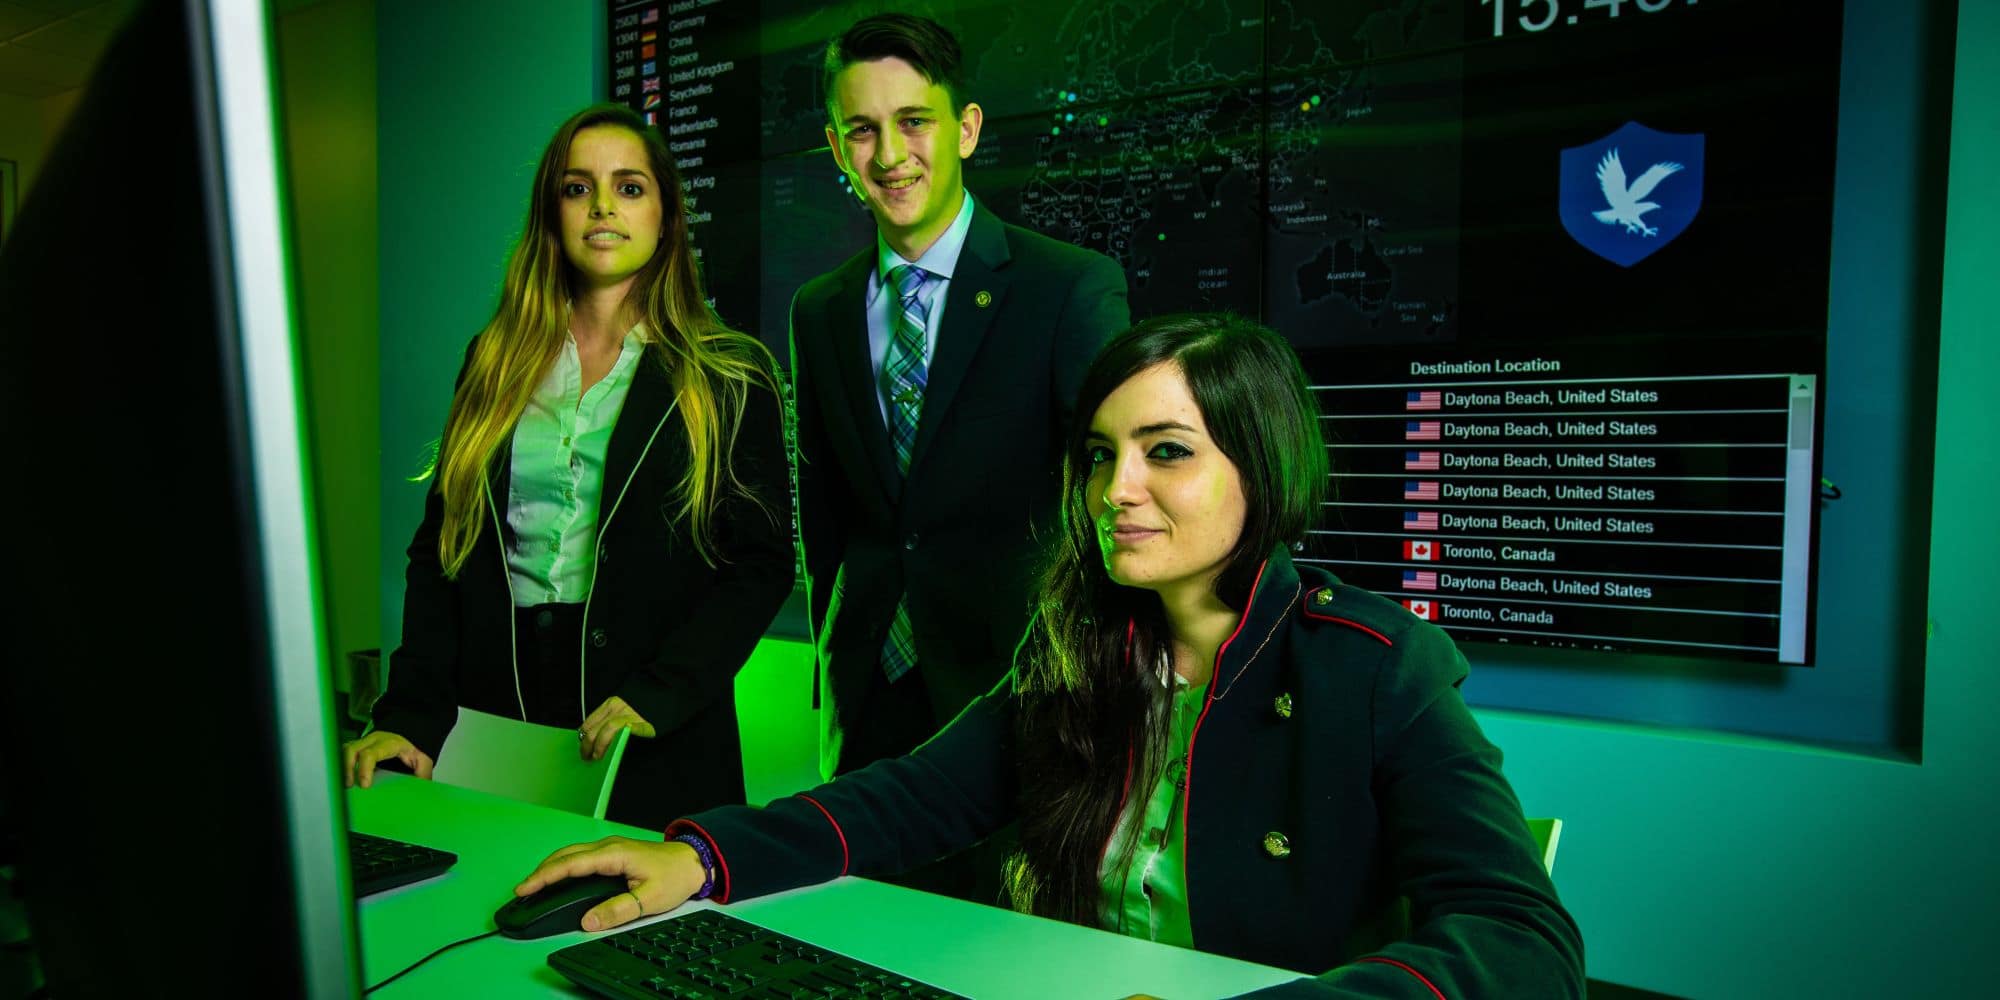 Students gather in state-of-the-art labs including the Cyber Lab, the Cybersecurity Engineering Lab or the Cybersecurity Virtual Laboratory to gain valuable skills before entering the industry. (Photo: Embry-Riddle / Connor McShane)